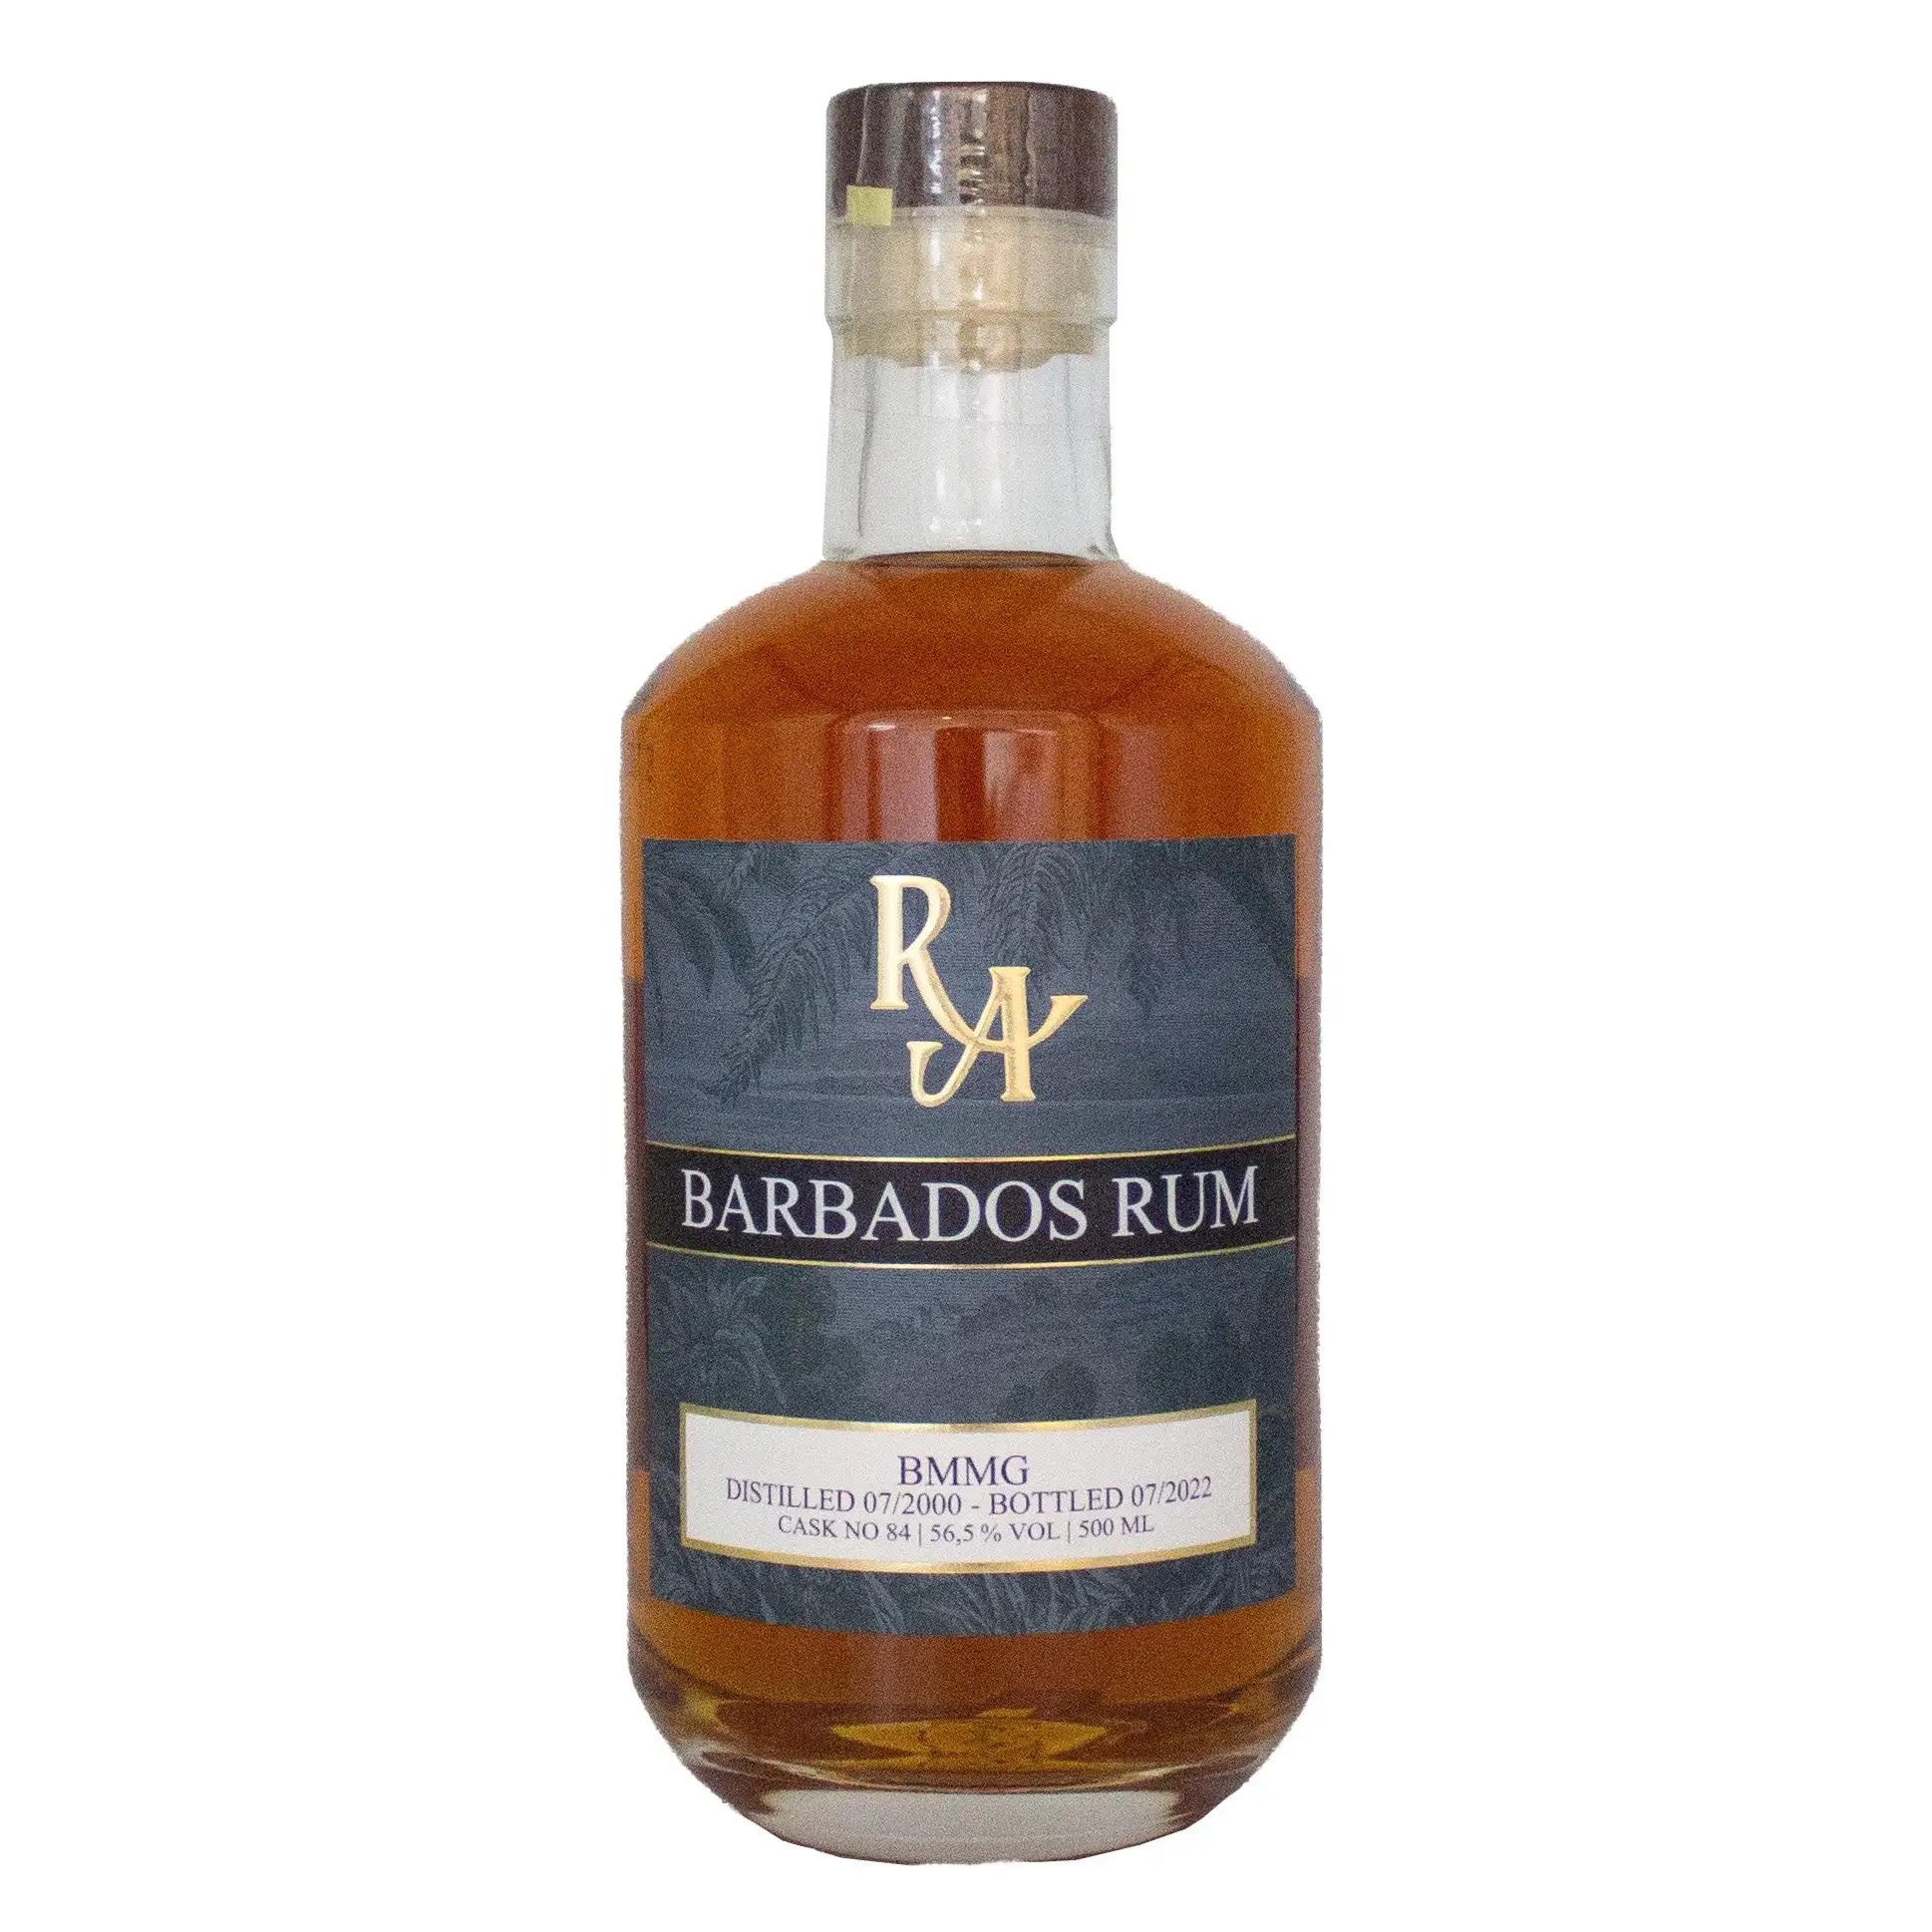 Image of the front of the bottle of the rum Rum Artesanal Barbados Rum BMMG